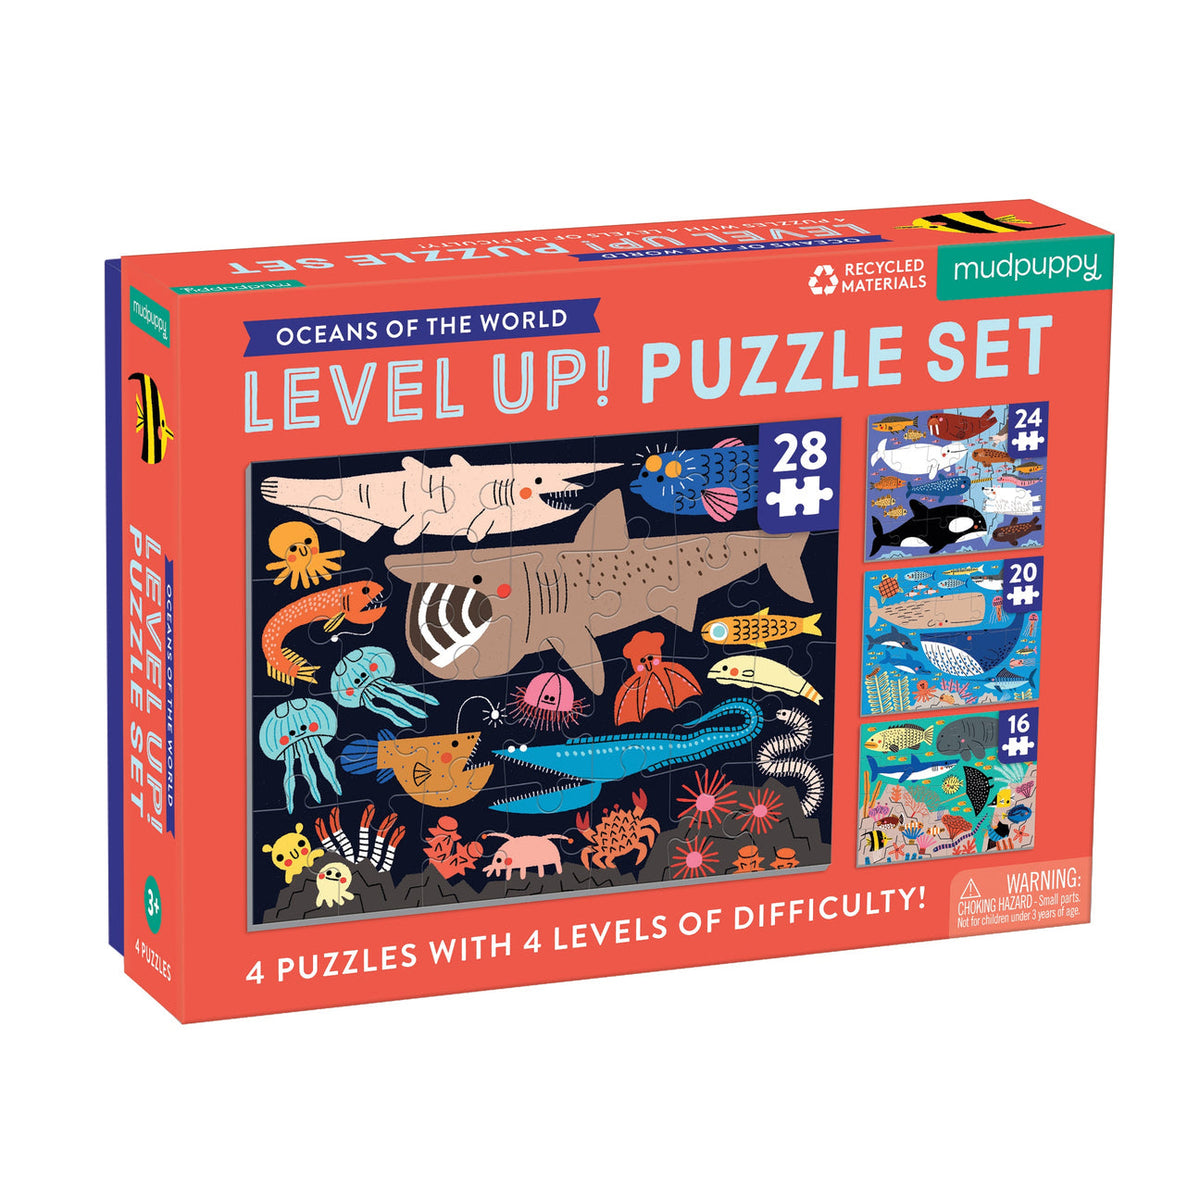 Mudpuppy Level Up! Puzzle Set - Oceans of the World